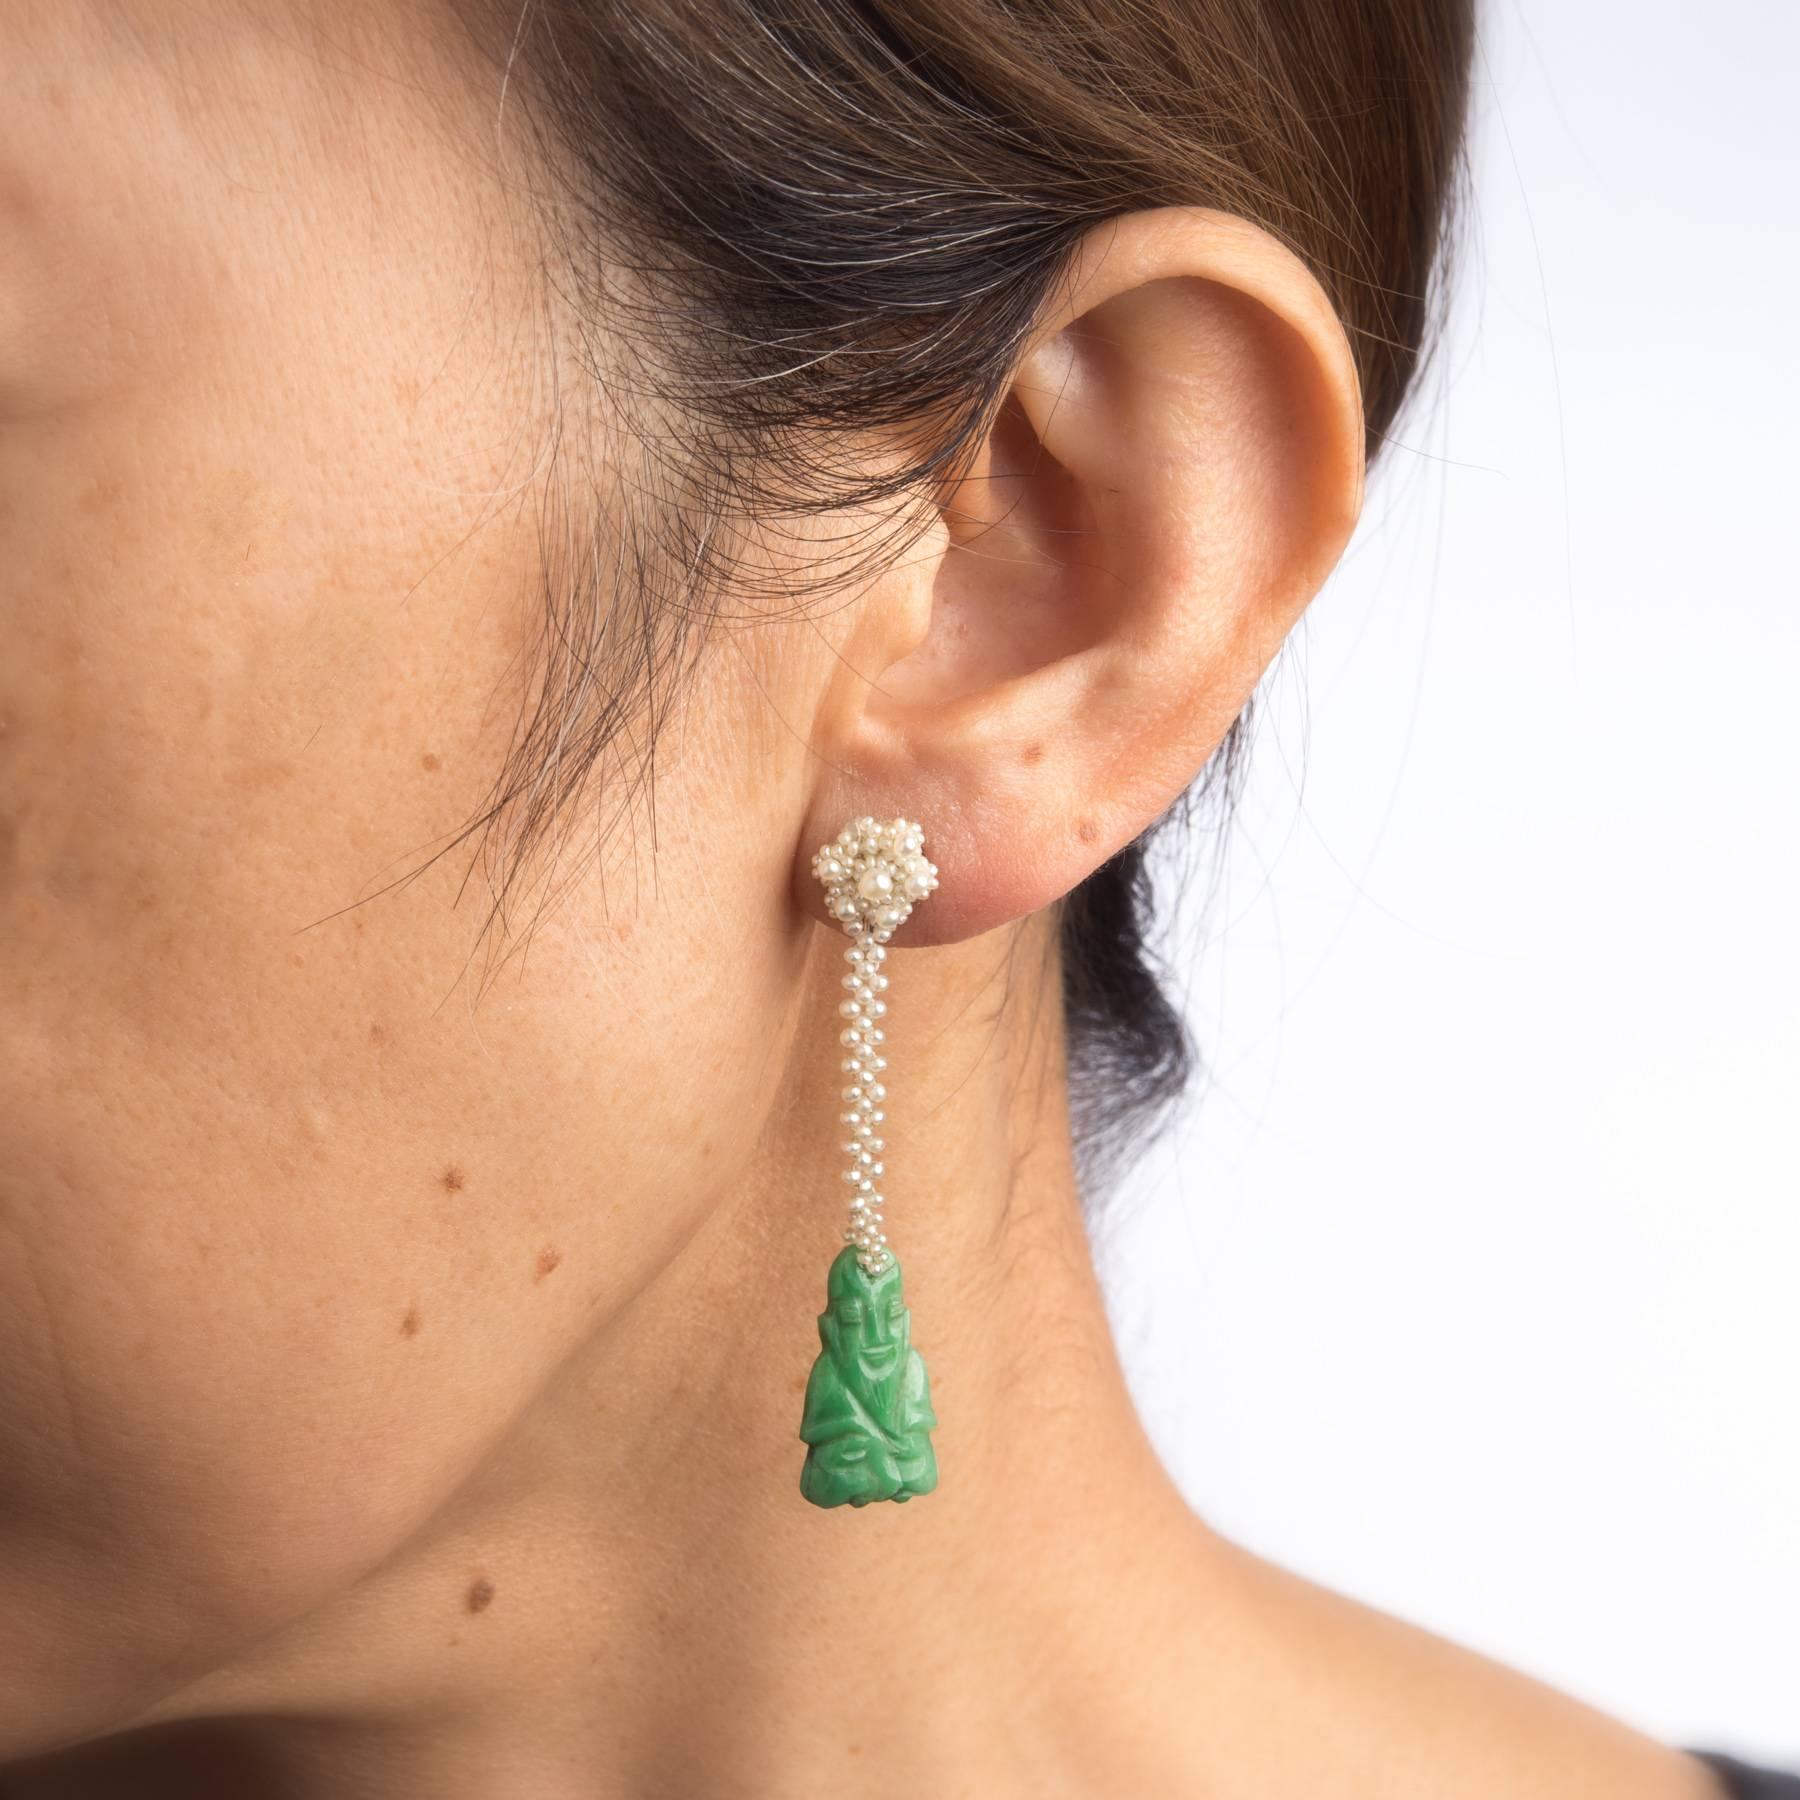 Overview:

Finely detailed pair of vintage drop earrings (circa 1950s to 1960s), crafted in 18k white gold. 

Jade is carved in the form of a Buddha and measures 19mm x 12mm, accented with seed pearls woven into a floral display (upper). The jade is